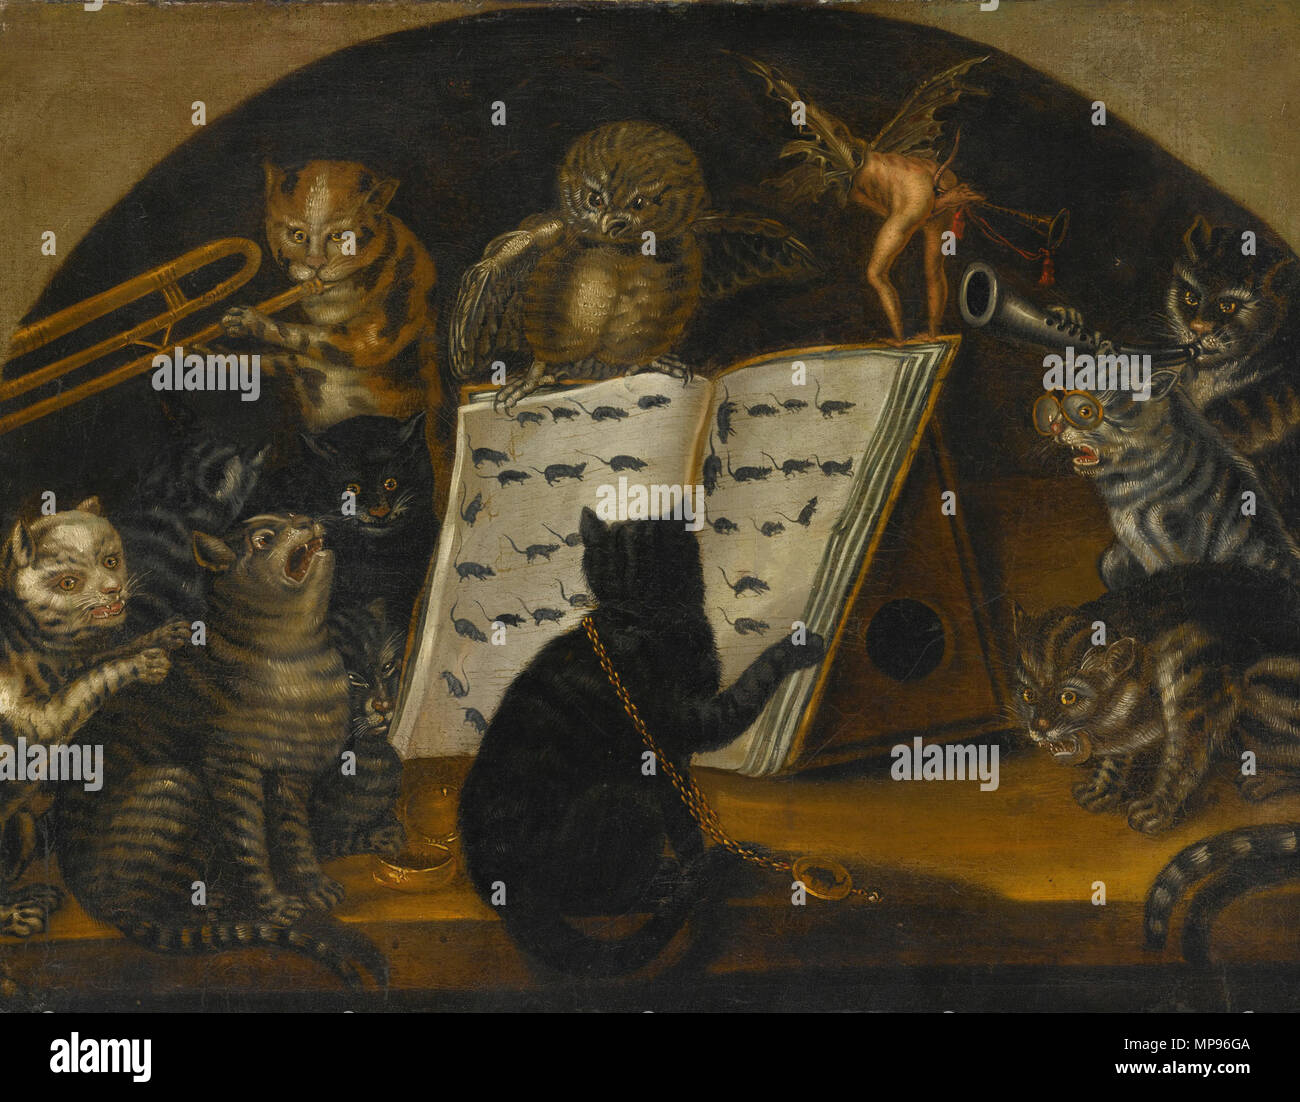 According to the auction house: Cats being instructed In the art of  mouse-catching by an owl Looks more like: A cat orchestra directed by an  owl, with sheet music made of